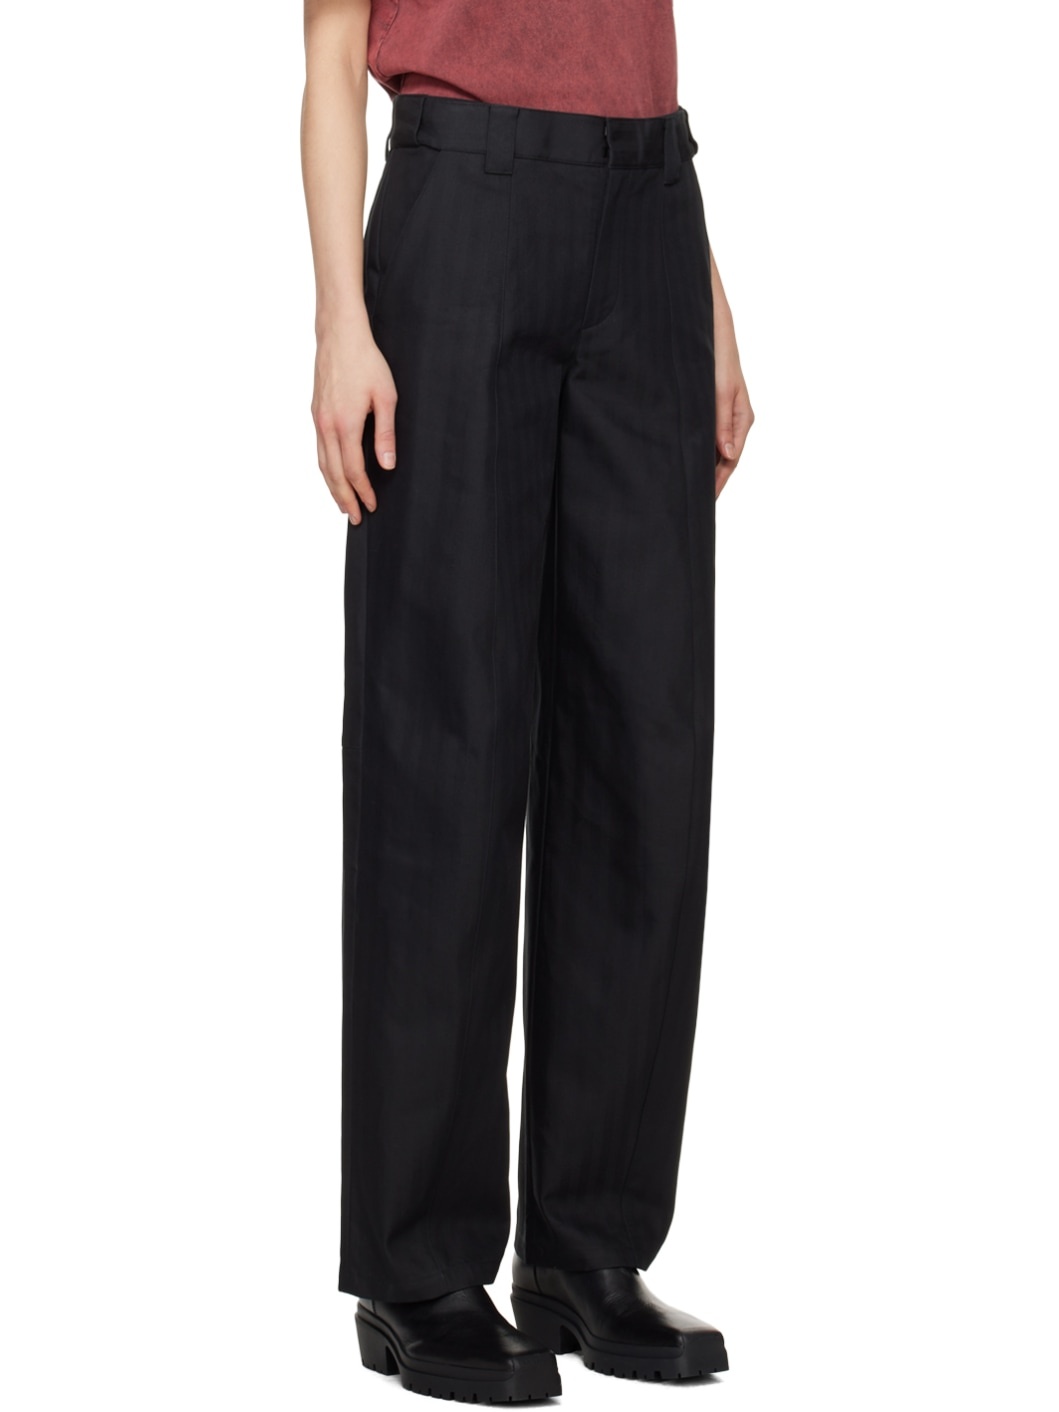 Black Tailored Trousers - 2